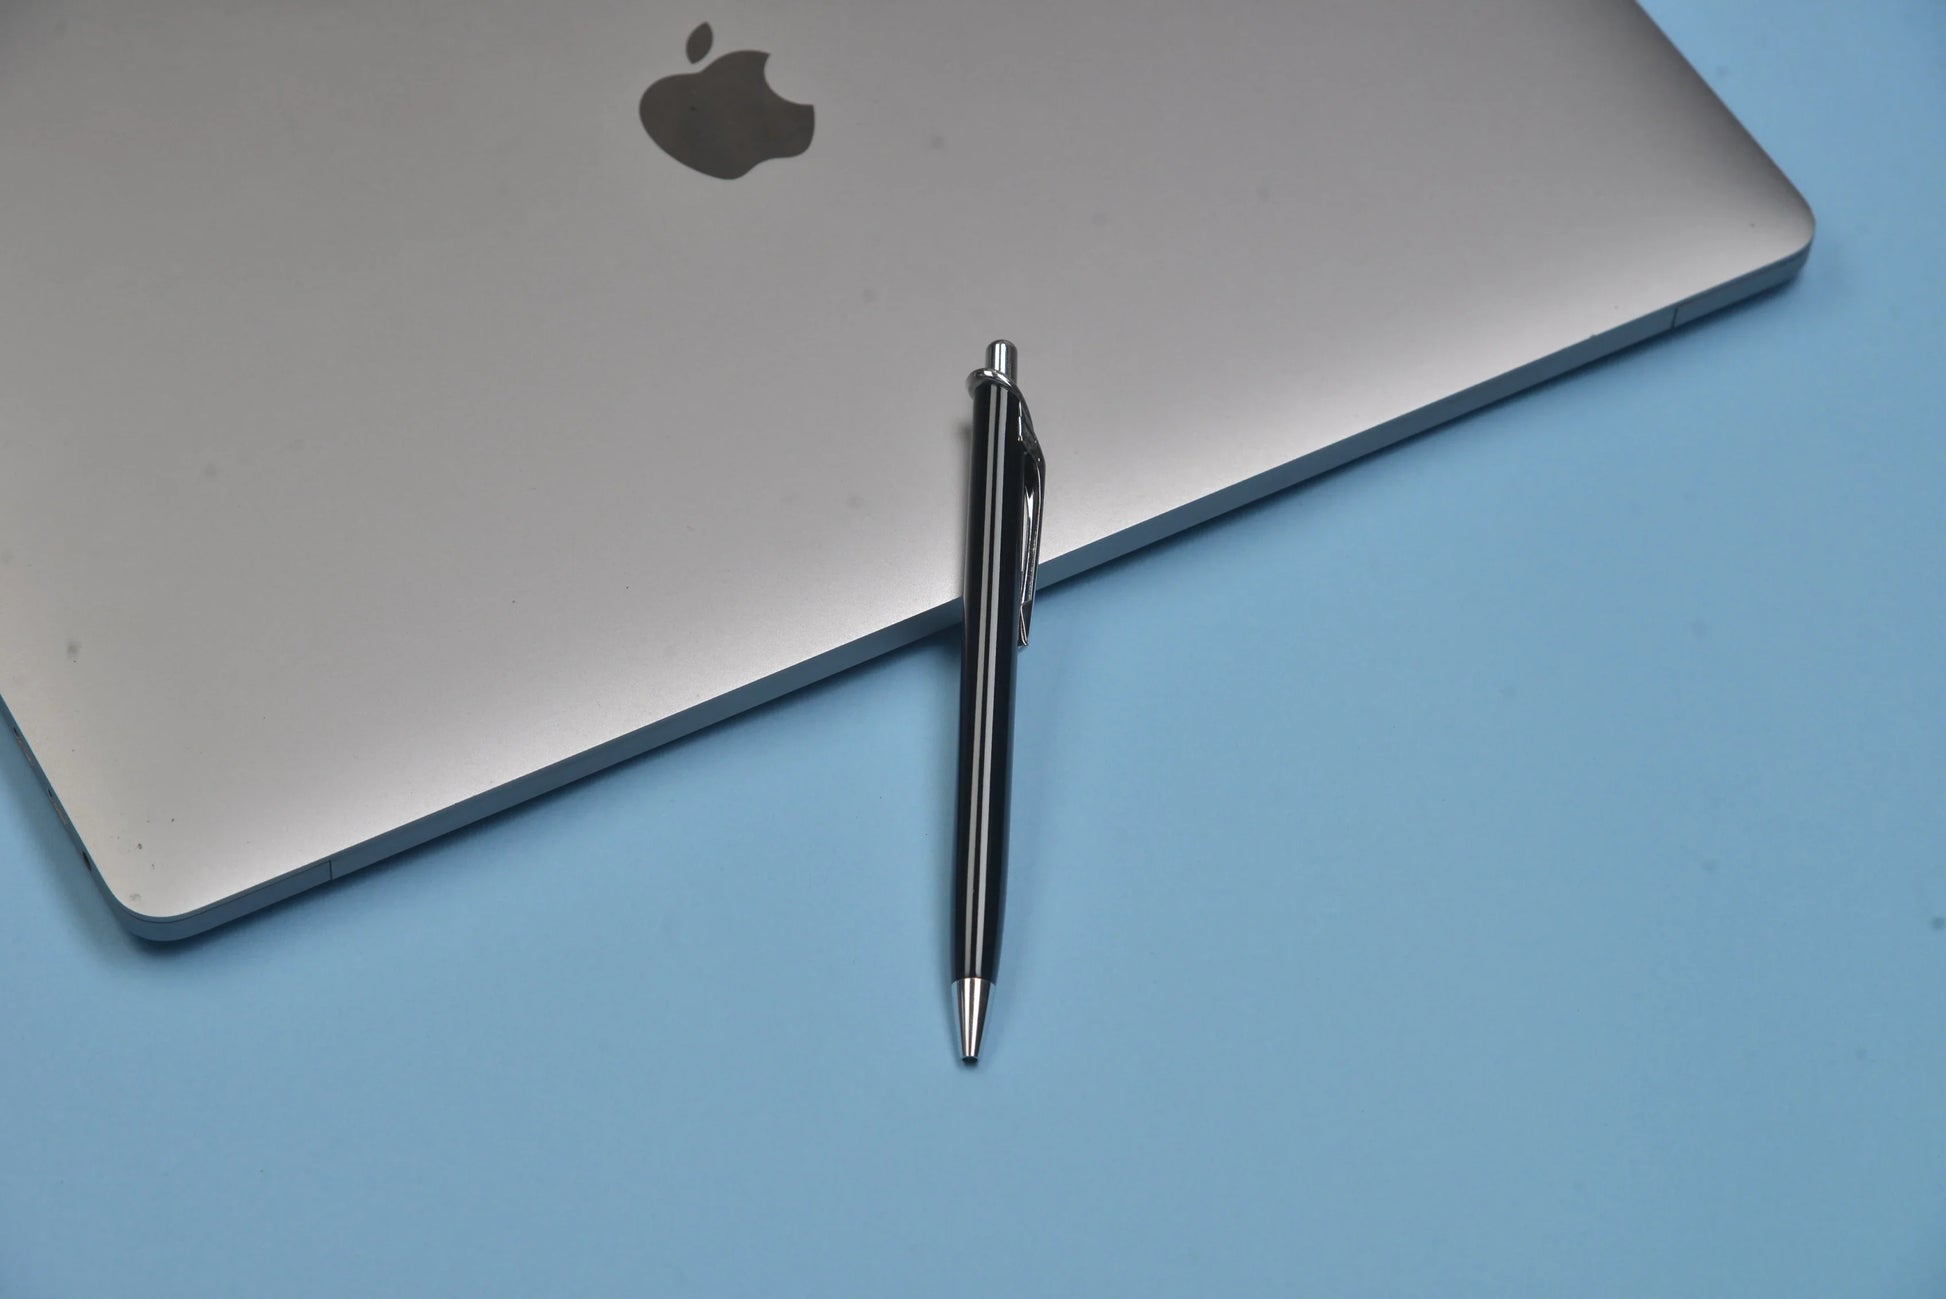 Make a statement with our premium quality pen. This pen features a sleek, black barrel and polished chrome accents, making it the perfect accessory for work or play. The smooth, refillable ballpoint and comfortable grip make it a pleasure to write with.